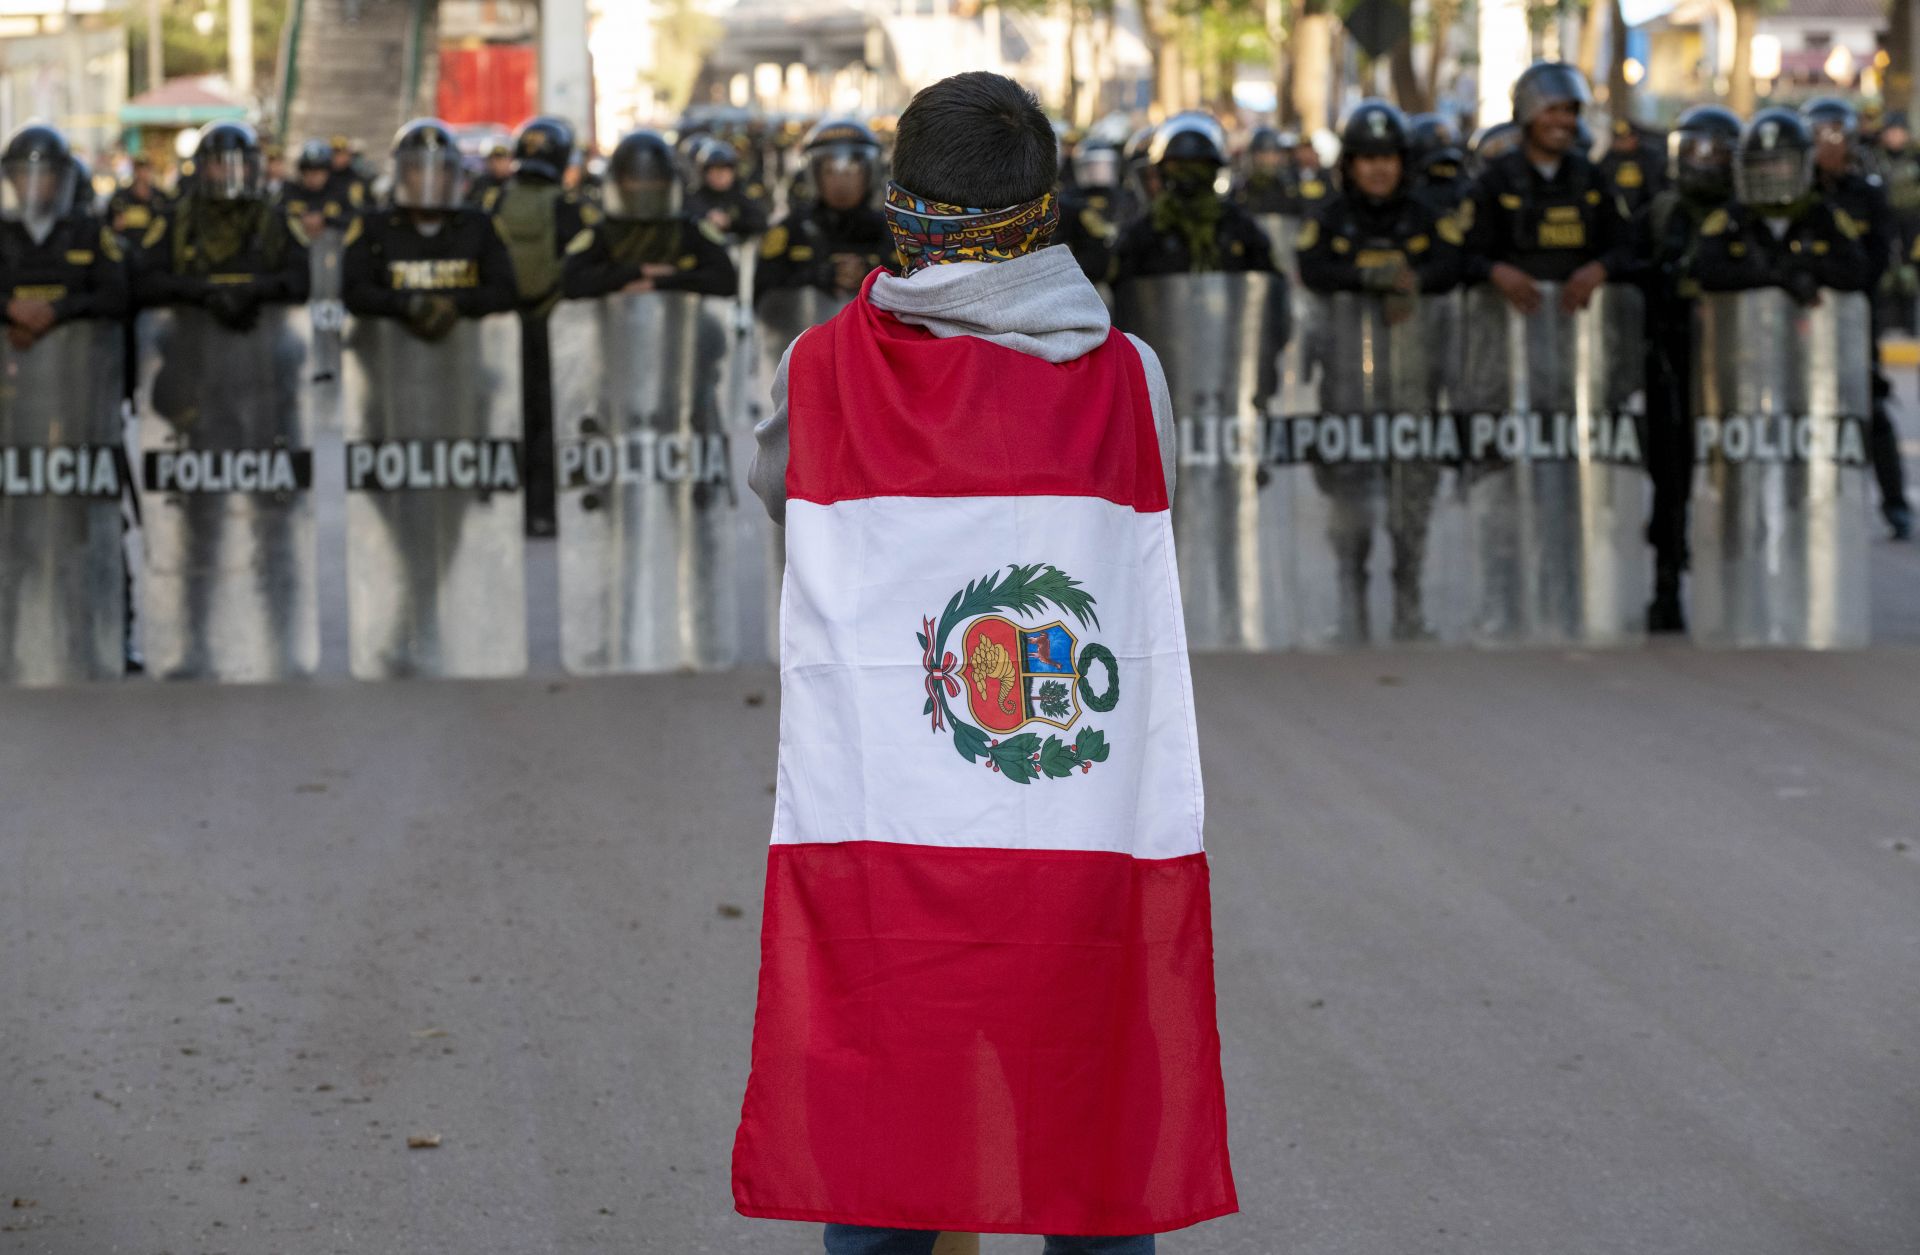 A demonstrator wearing the Peruvian flag stands in front of police officers forming a barrier with their riot shields near the entrance of the airport in Cusco, Peru, on Jan. 19, 2023.